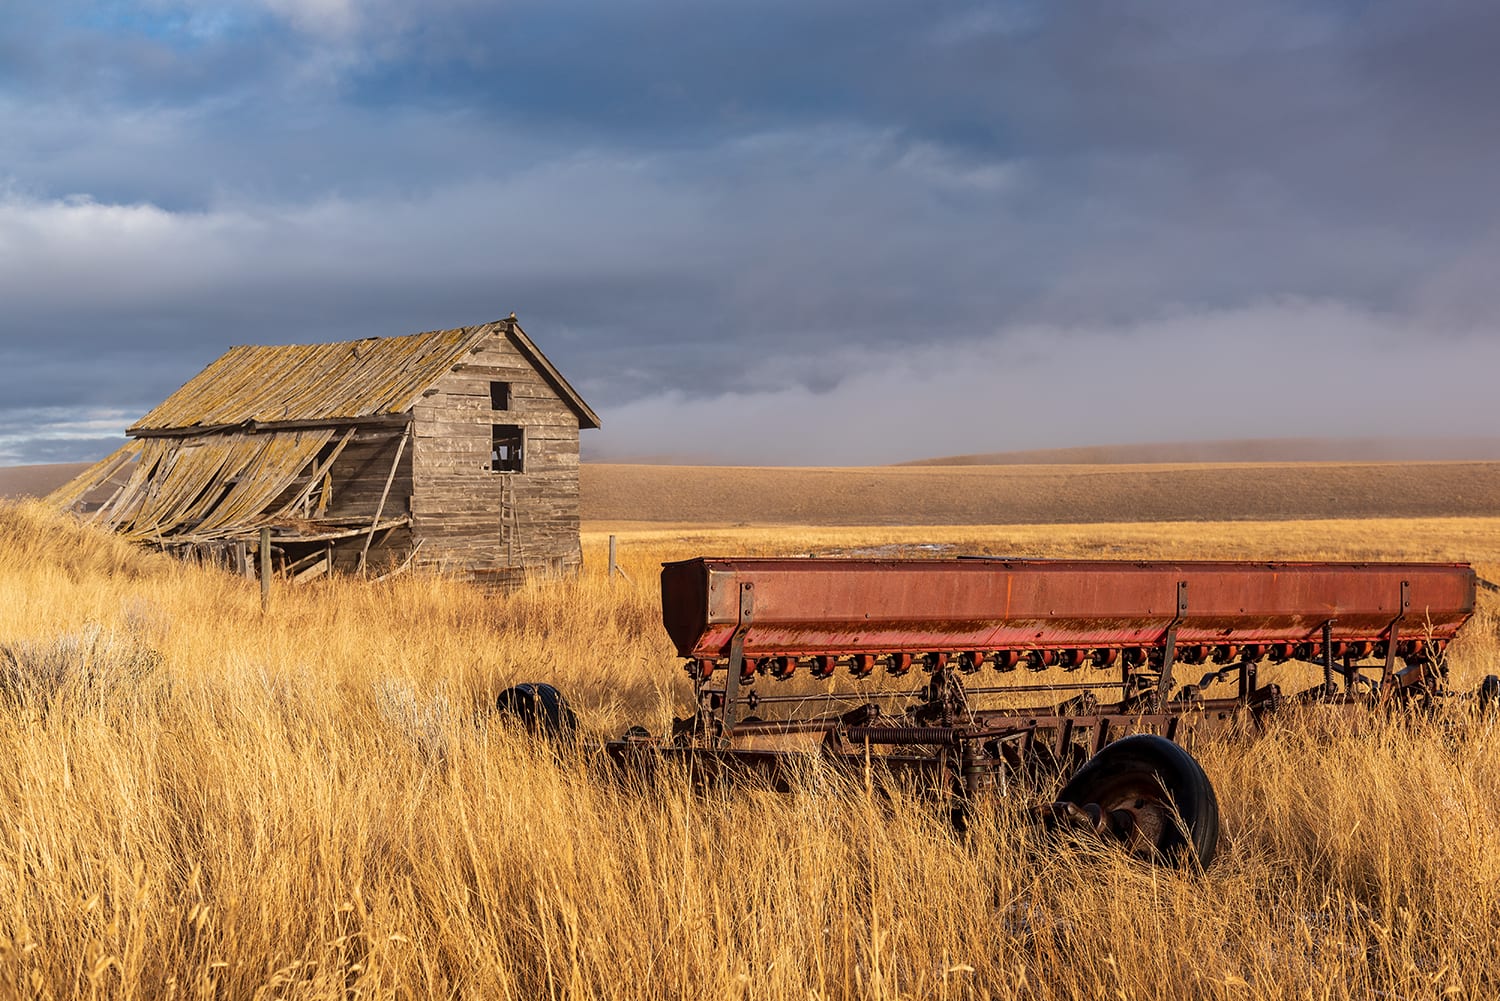 Kamloops rural life farming equipment with wooden shed and tall grass